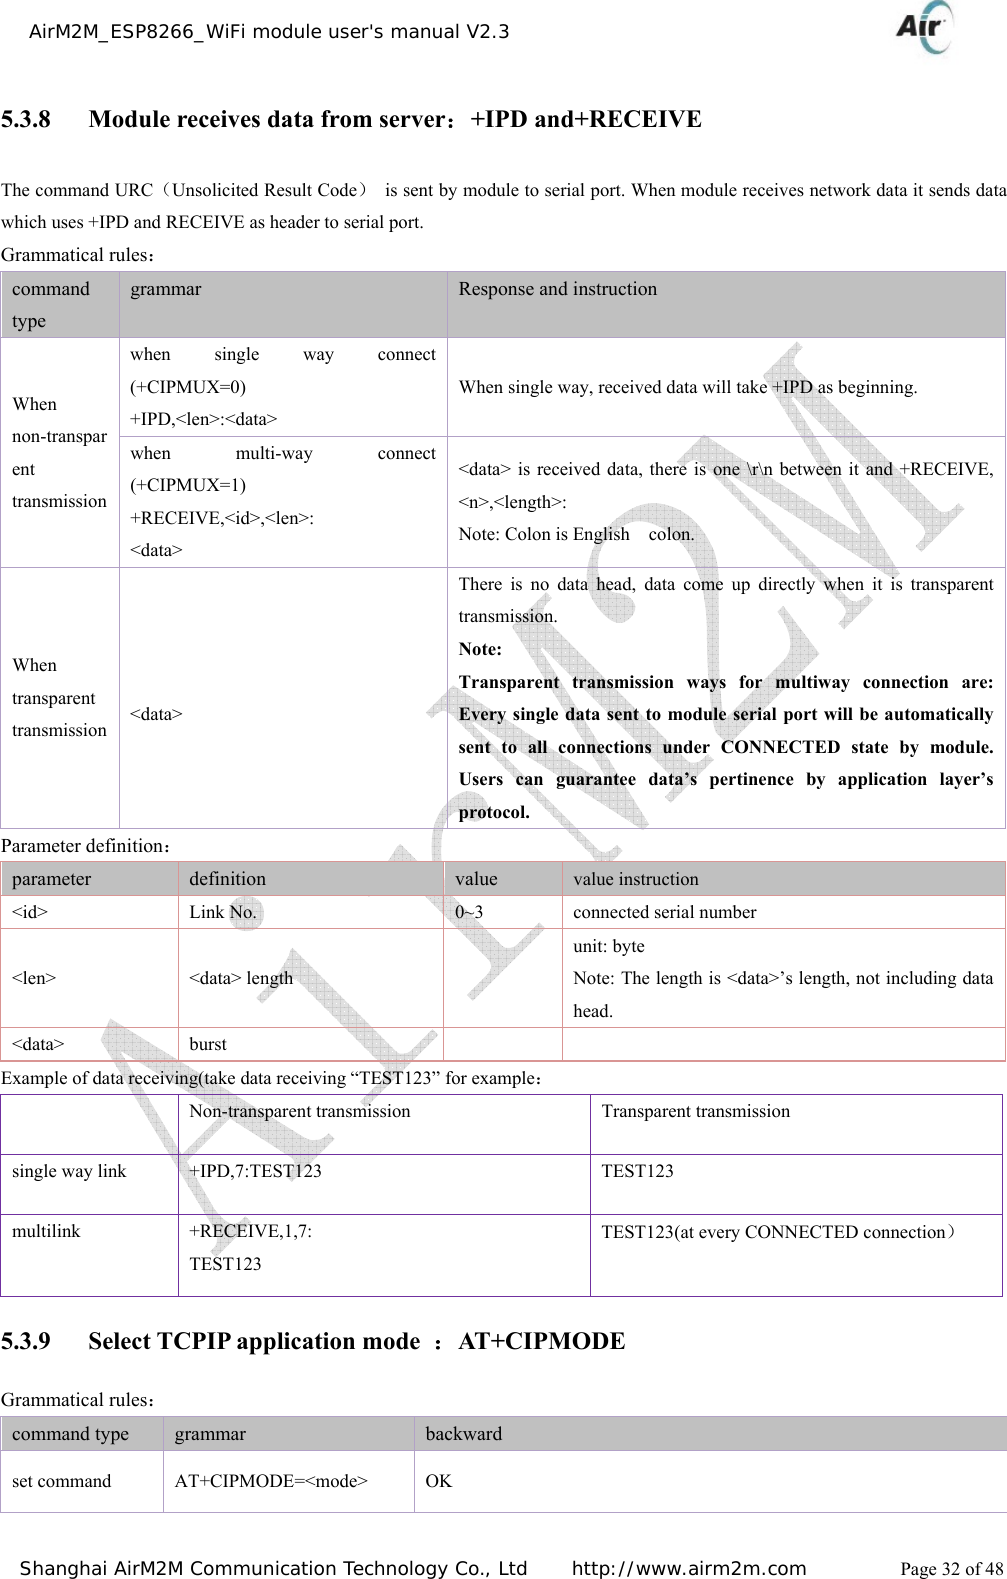    AirM2M_ESP8266_WiFi module user&apos;s manual V2.3   Shanghai AirM2M Communication Technology Co., Ltd     http://www.airm2m.com          Page 32 of 48 5.3.8 Module receives data from server：+IPD and+RECEIVE The command URC（Unsolicited Result Code）  is sent by module to serial port. When module receives network data it sends data which uses +IPD and RECEIVE as header to serial port. Grammatical rules： command type grammar  Response and instruction When non-transparent transmission when single way connect (+CIPMUX=0)  +IPD,&lt;len&gt;:&lt;data&gt;  When single way, received data will take +IPD as beginning. when multi-way connect (+CIPMUX=1)  +RECEIVE,&lt;id&gt;,&lt;len&gt;: &lt;data&gt;  &lt;data&gt; is received data, there is one \r\n between it and +RECEIVE, &lt;n&gt;,&lt;length&gt;: Note: Colon is English    colon. When transparent transmission  &lt;data&gt; There is no data head, data come up directly when it is transparent transmission. Note:  Transparent transmission ways for multiway connection are: Every single data sent to module serial port will be automatically sent to all connections under CONNECTED state by module. Users can guarantee data’s pertinence by application layer’s protocol. Parameter definition： parameter  definition  value  value instruction &lt;id&gt; Link No.  0~3 connected serial number &lt;len&gt; &lt;data&gt; length   unit: byte Note: The length is &lt;data&gt;’s length, not including data head. &lt;data&gt; burst    Example of data receiving(take data receiving “TEST123” for example：   Non-transparent transmission  Transparent transmission single way link  +IPD,7:TEST123  TEST123 multilink +RECEIVE,1,7: TEST123 TEST123(at every CONNECTED connection） 5.3.9 Select TCPIP application mode  ：AT+CIPMODE Grammatical rules： command type  grammar  backward set command  AT+CIPMODE=&lt;mode&gt;  OK 